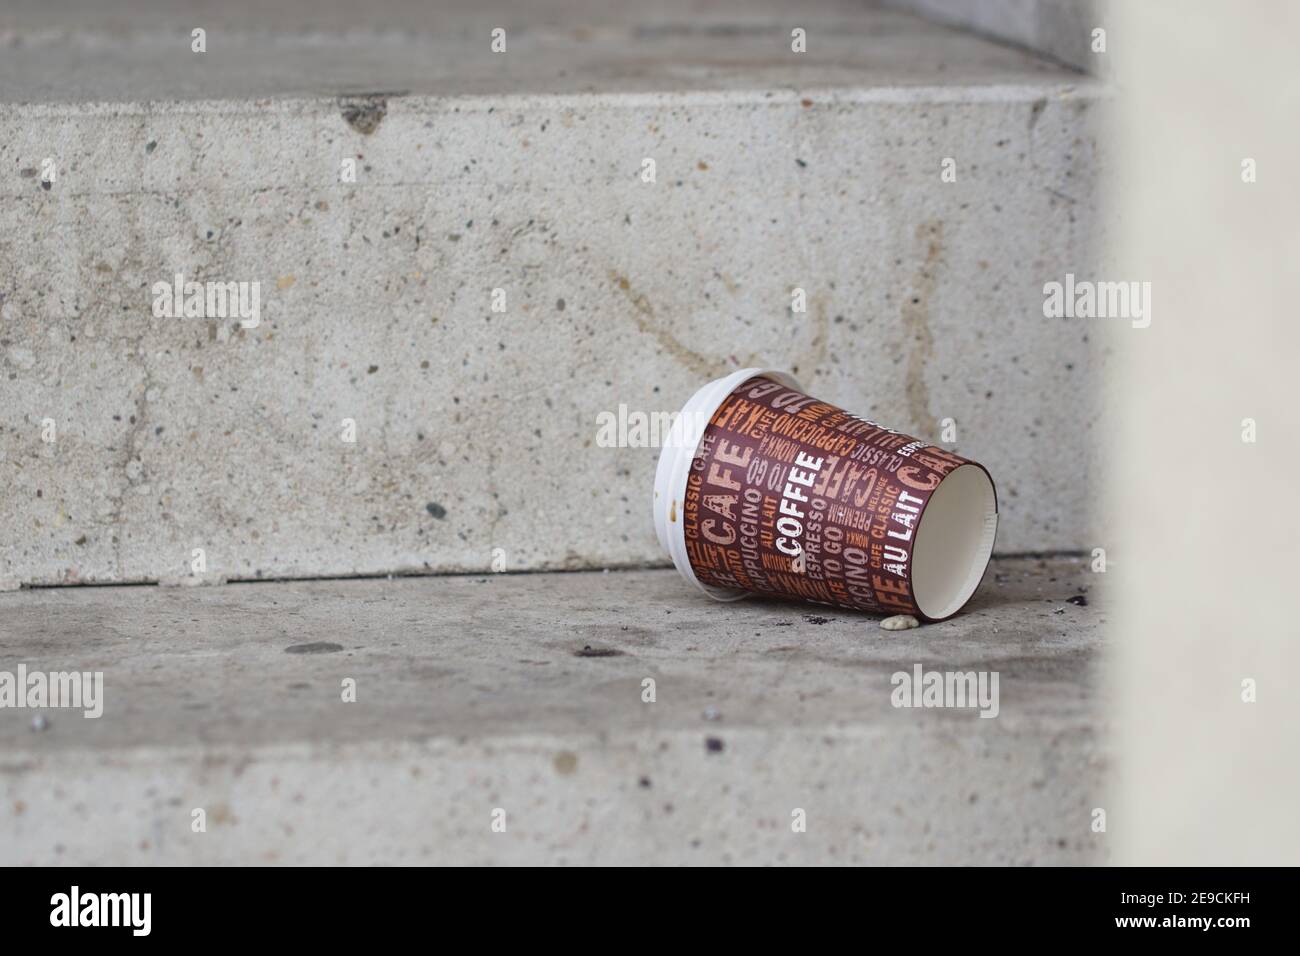 disposable coffee to co cup thrown away on the floor - waste and environmental pollution Stock Photo